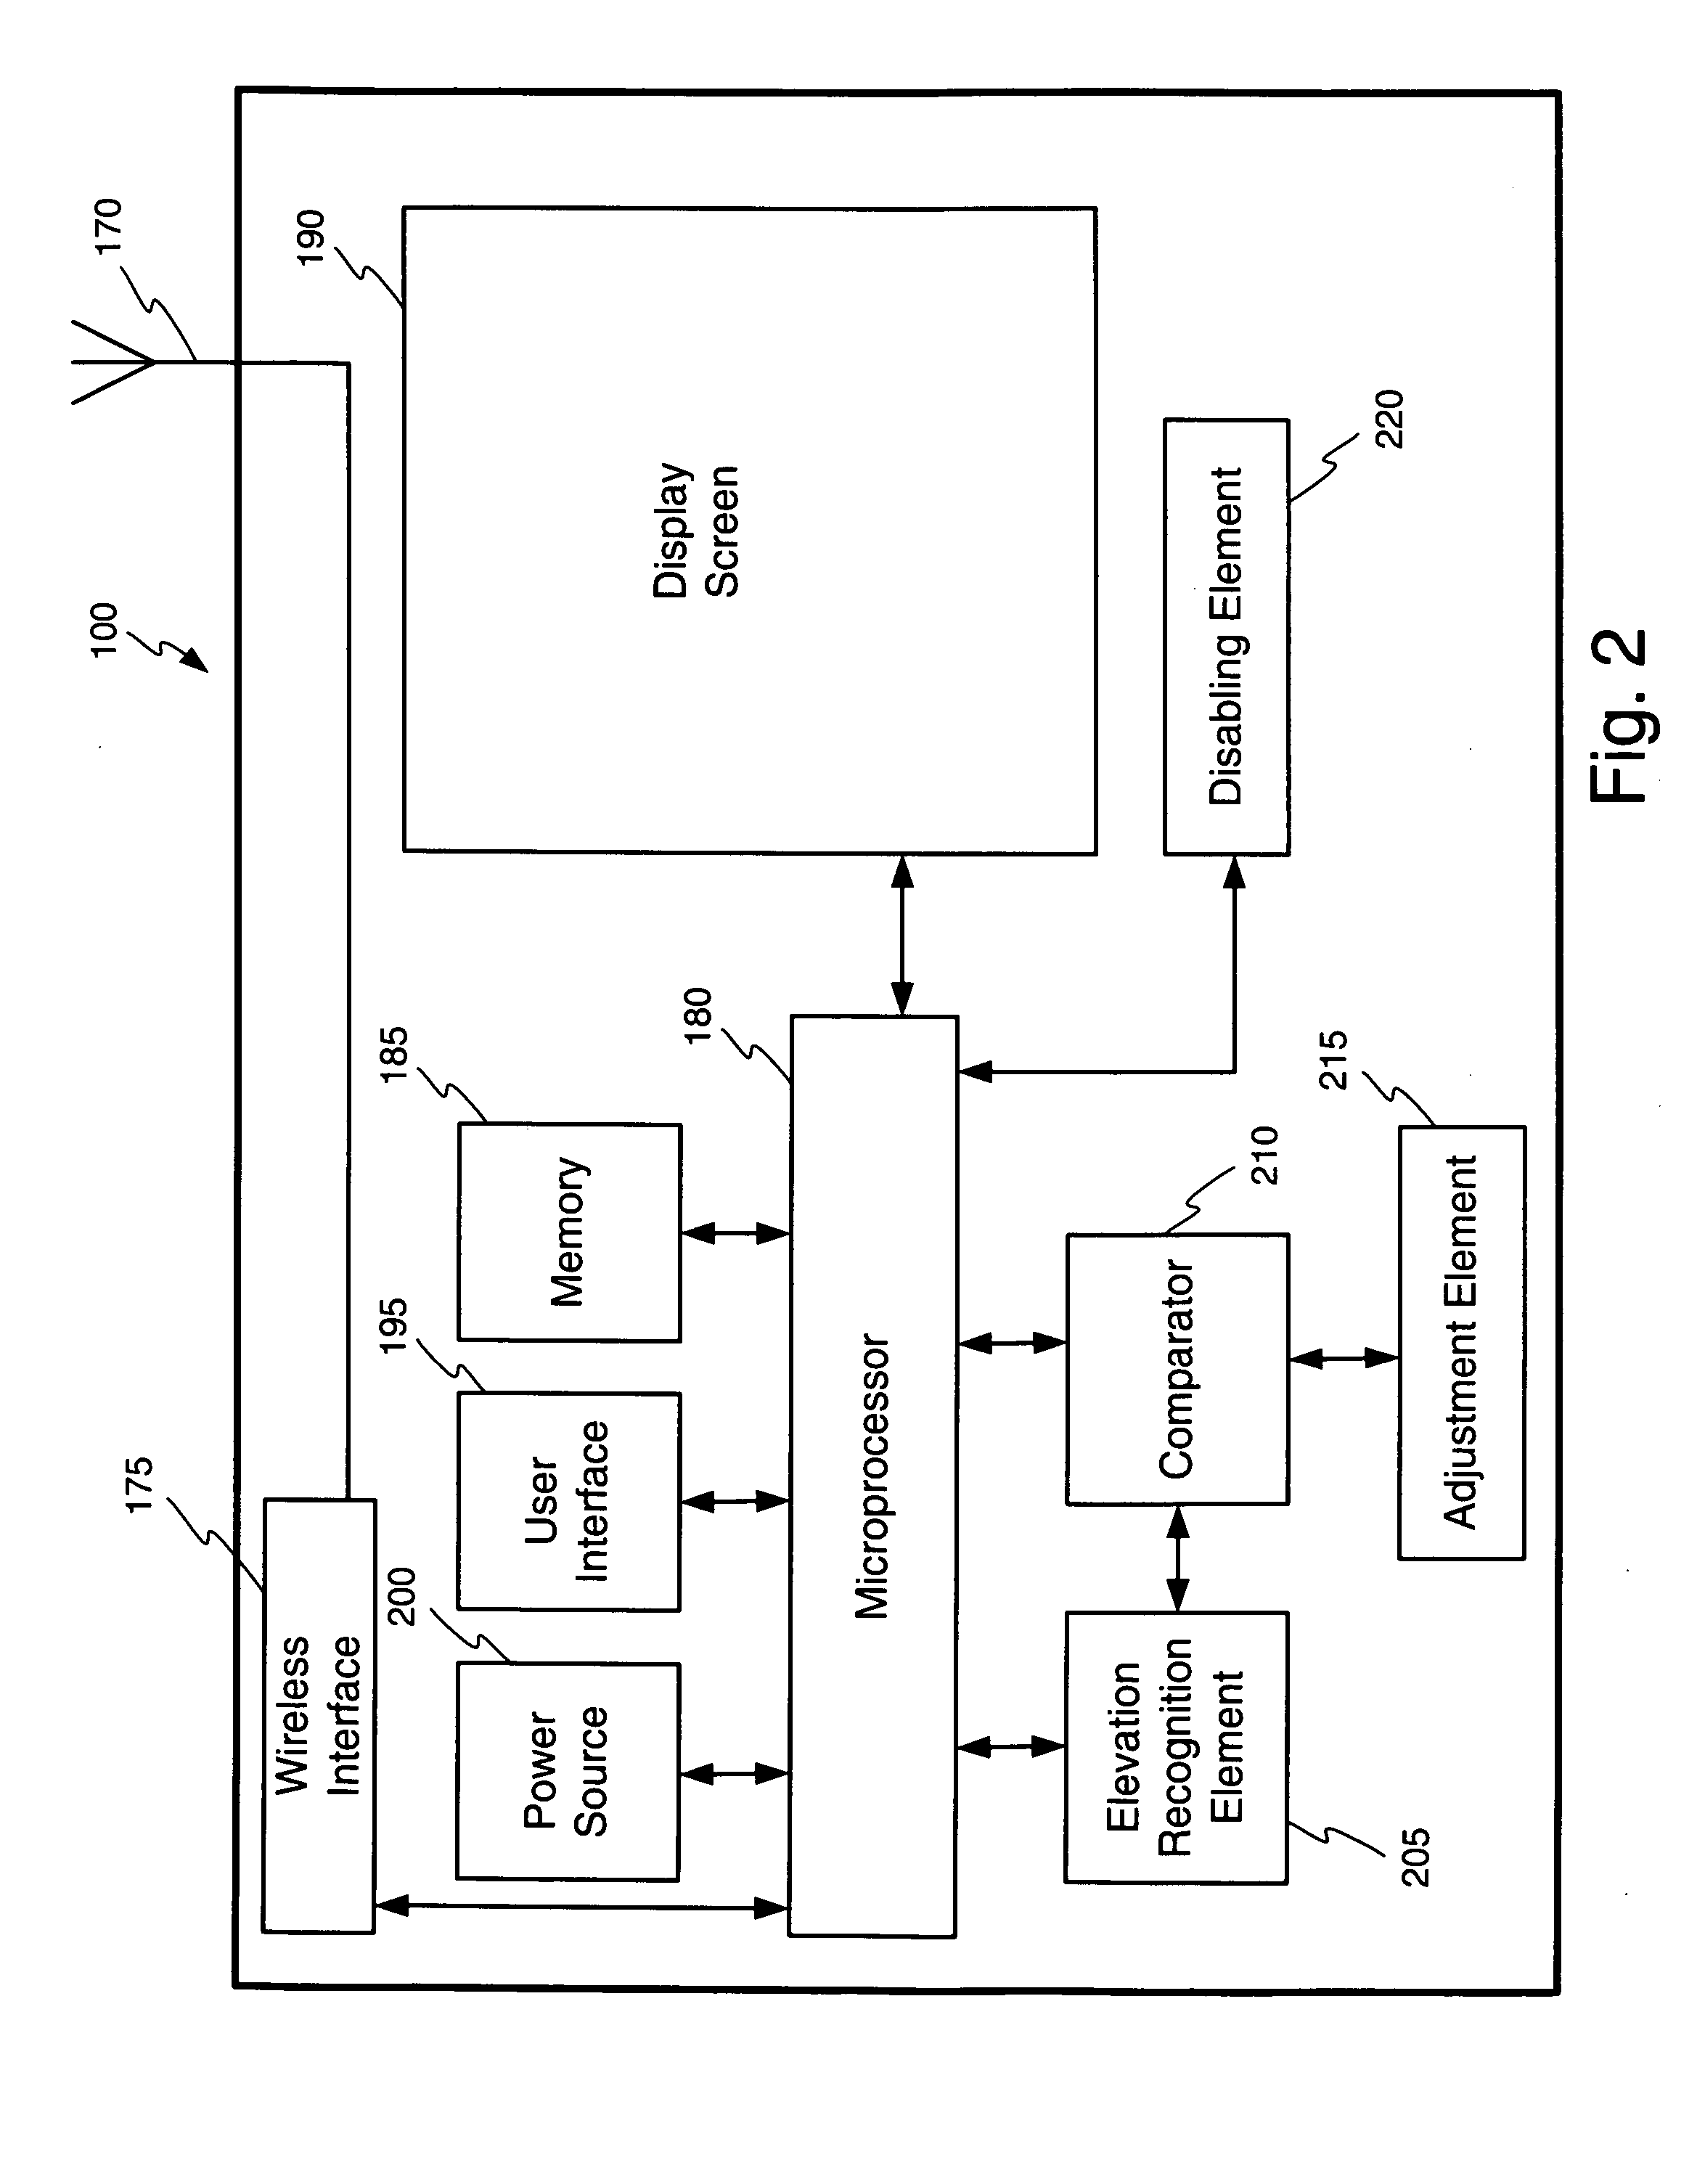 Method and apparatus for operating a mobile gaming system